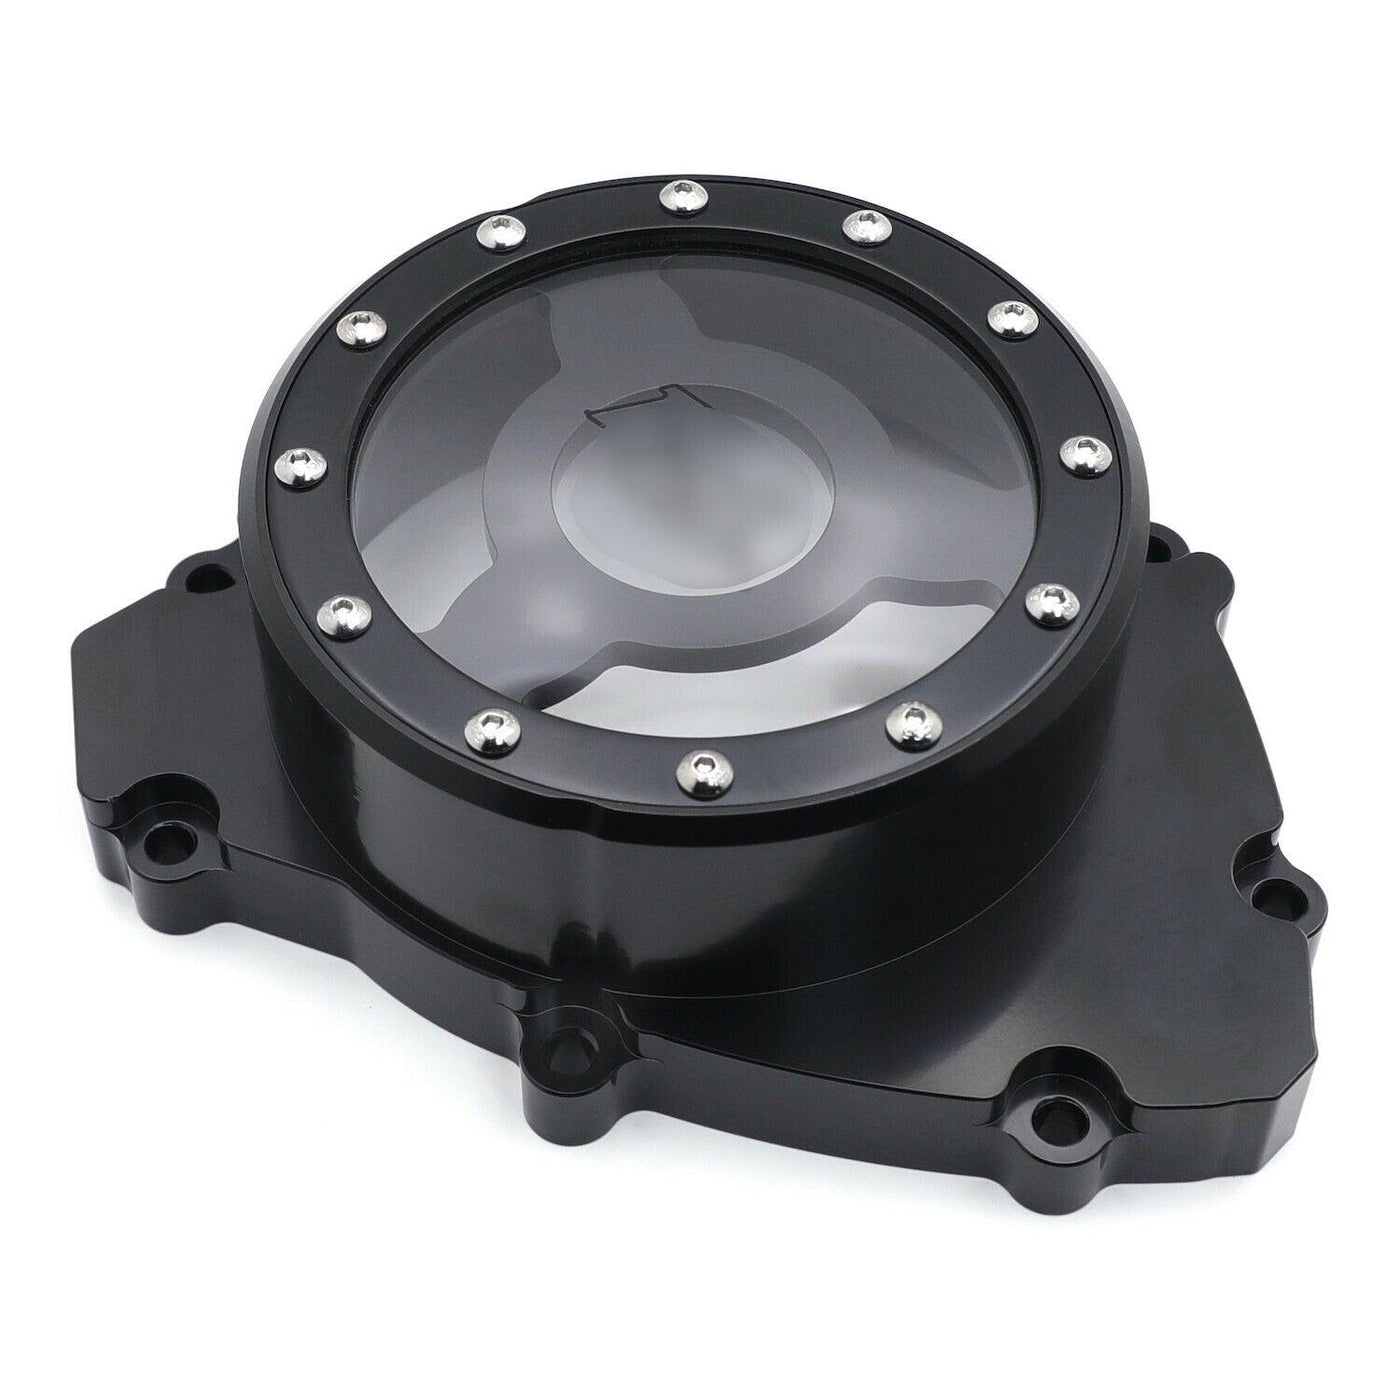 Left Stator Engine Cover For Yamaha YZF R1 2009-2014 Black Clear Crankcase Case - Moto Life Products